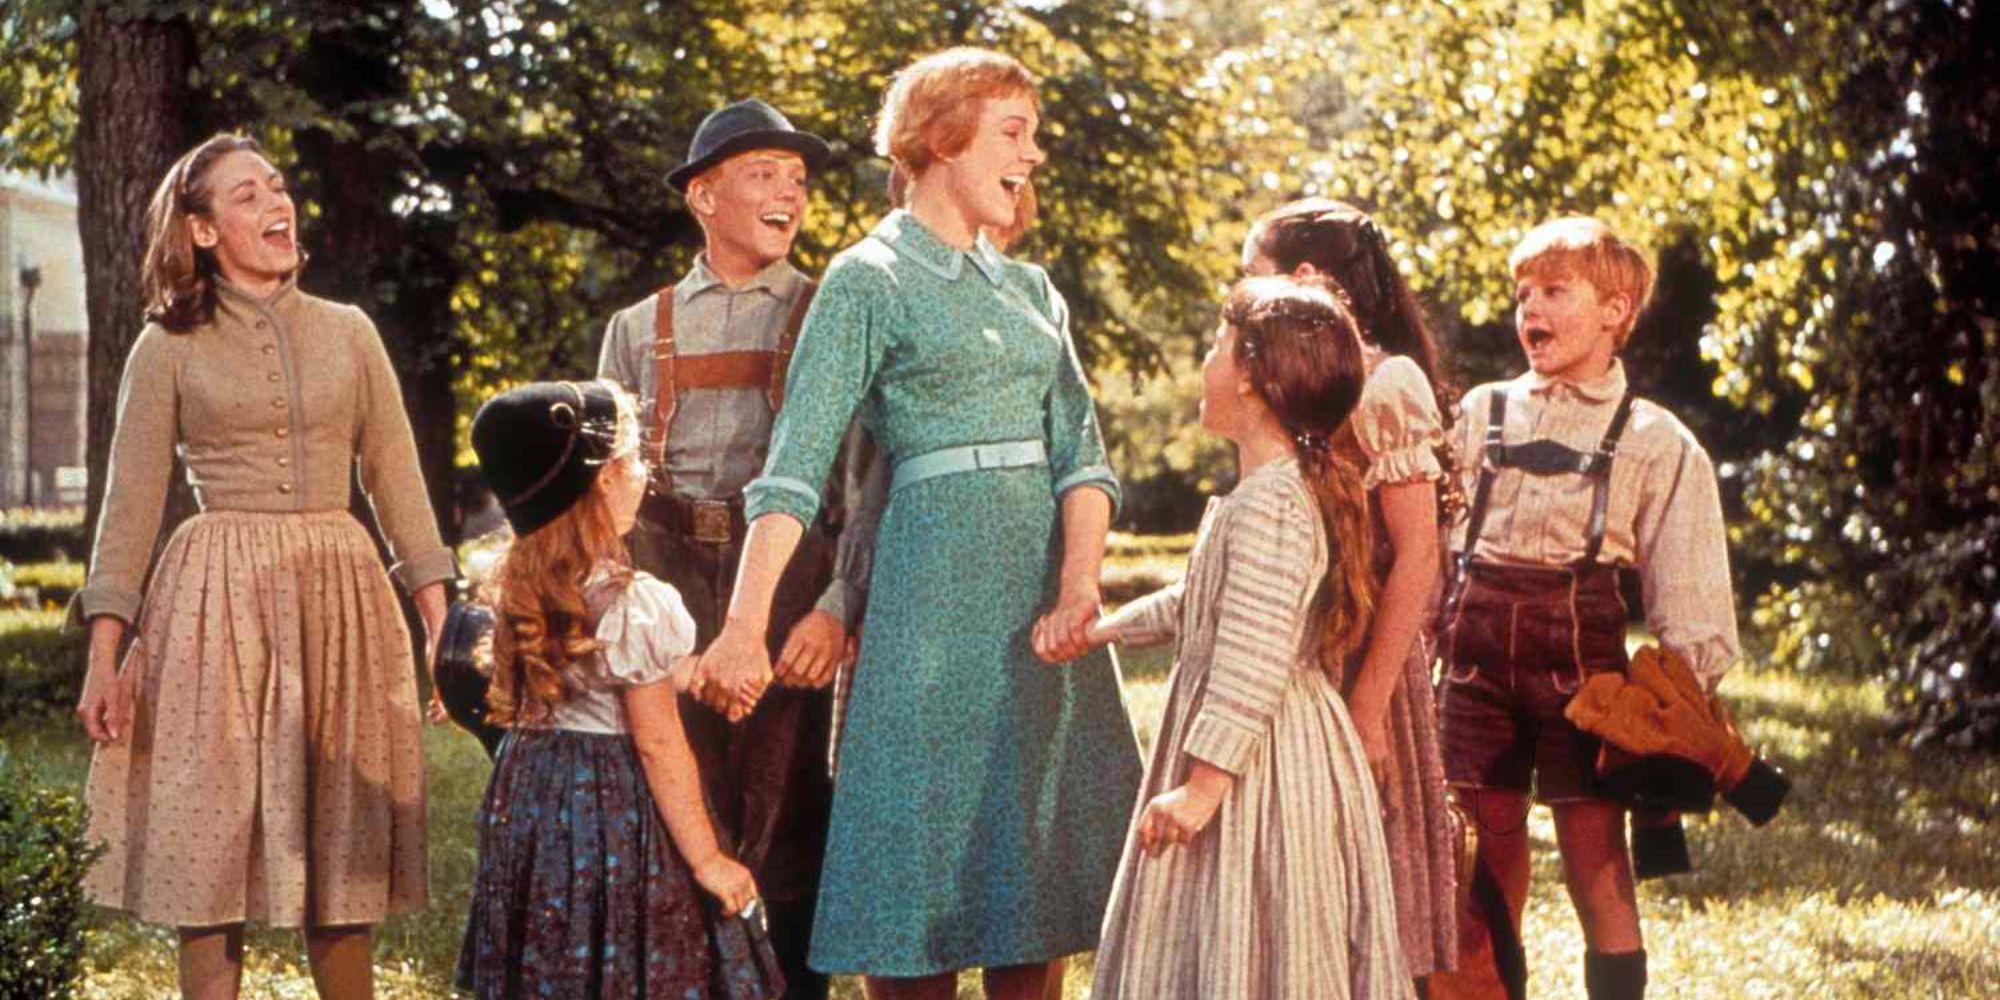 Julie Andrews as Maria in The Sound of Music surrounded by the von Trapp children